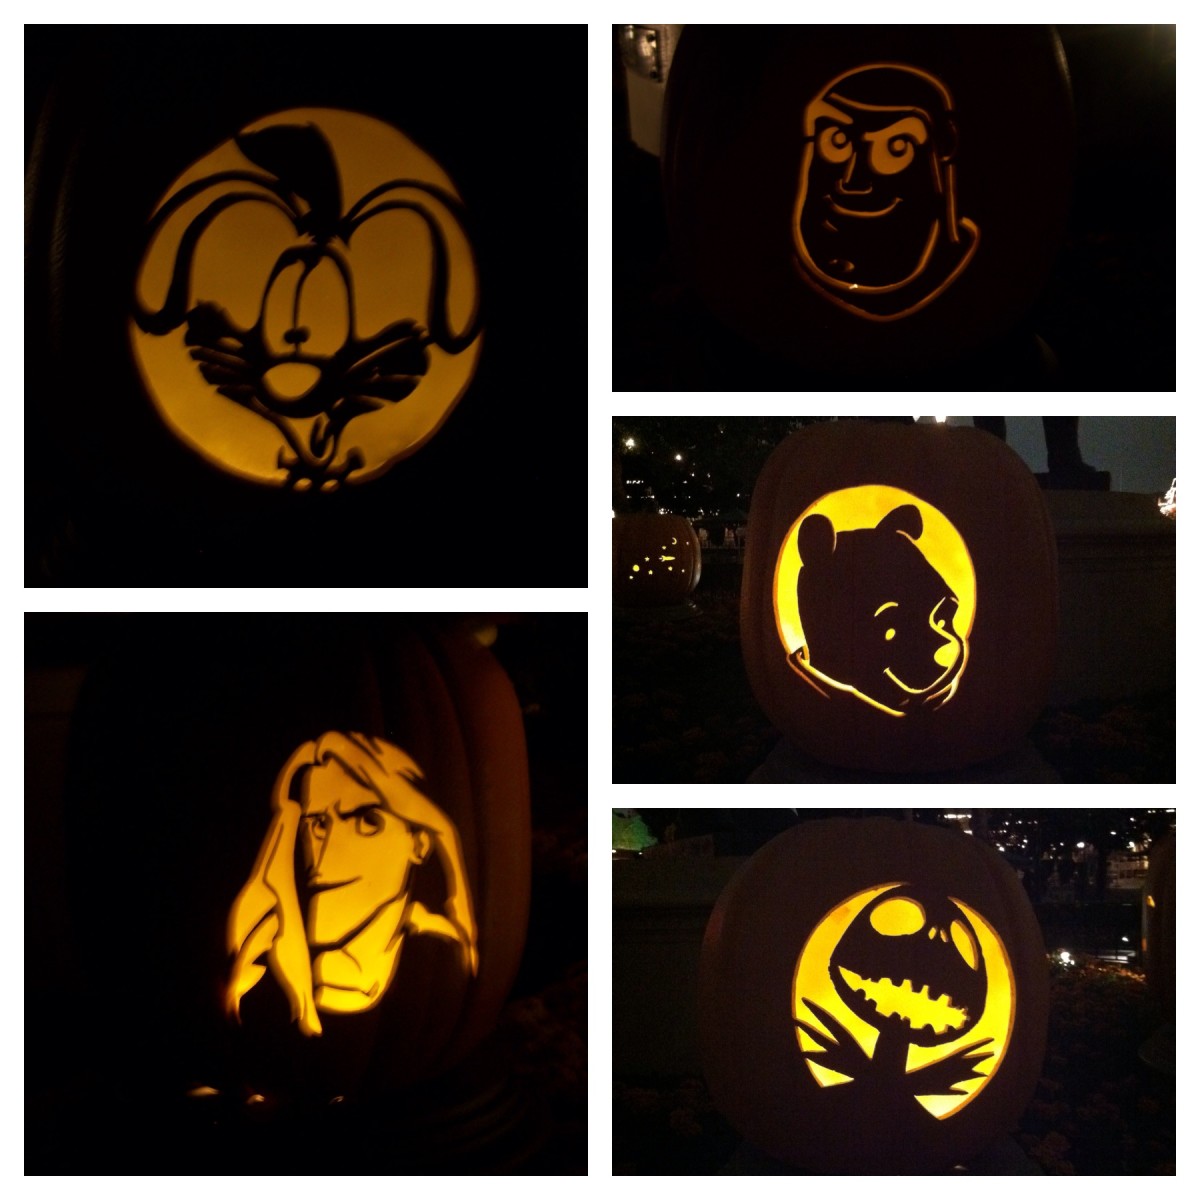 Some jack-o-lanterns are carved as famous Disney characters.